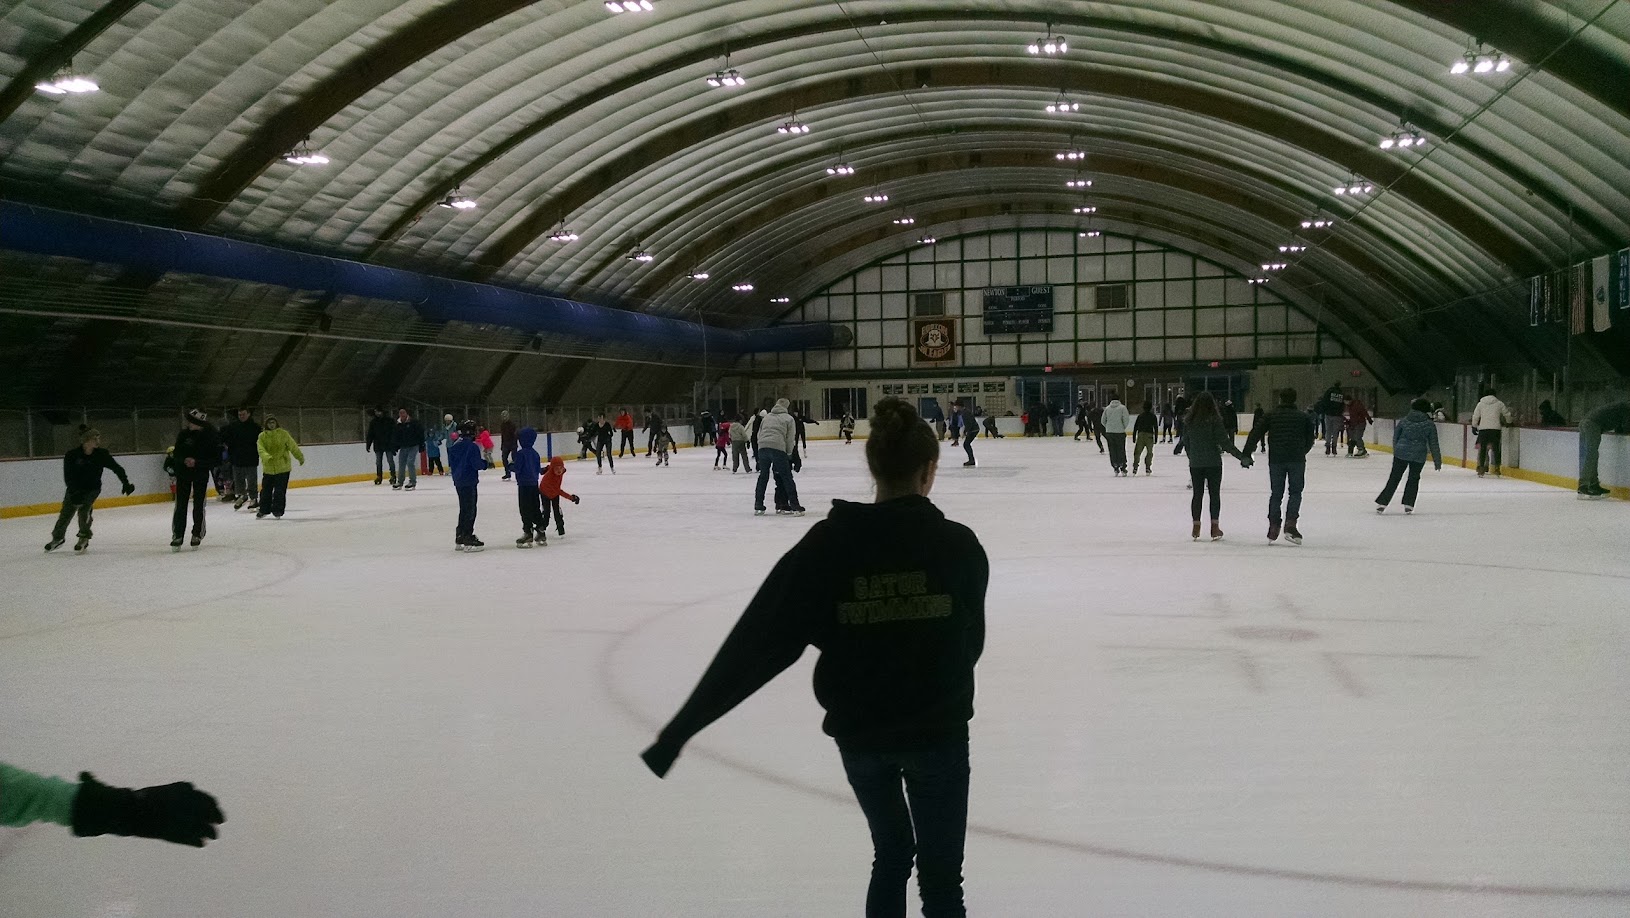 Daly Ice Rink